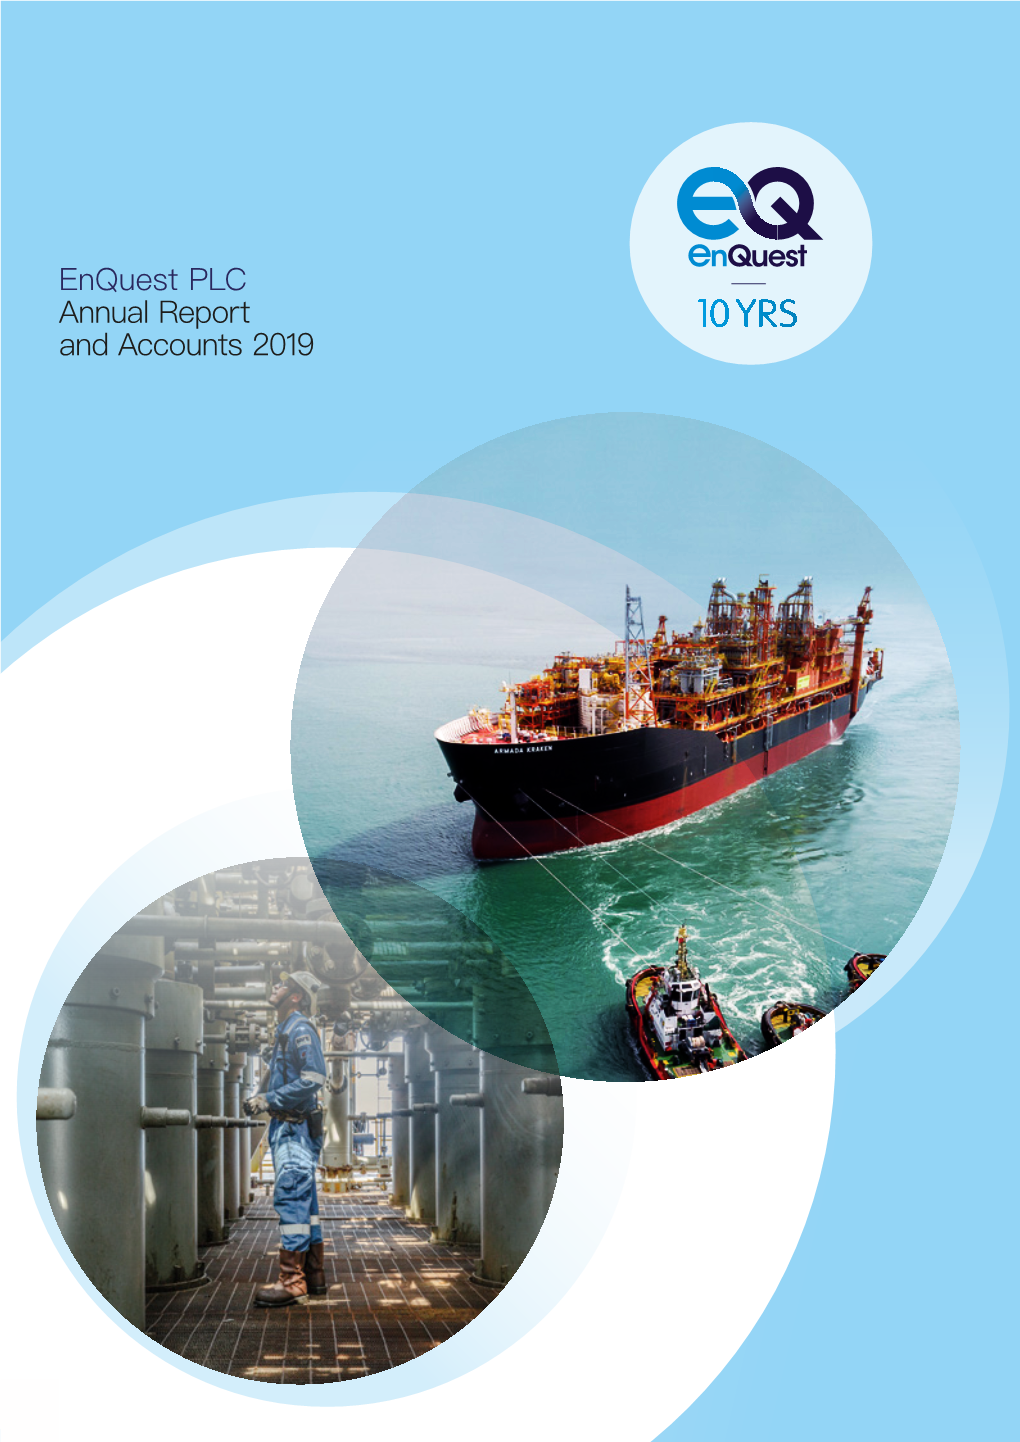 Enquest PLC Annual Report and Accounts 2019